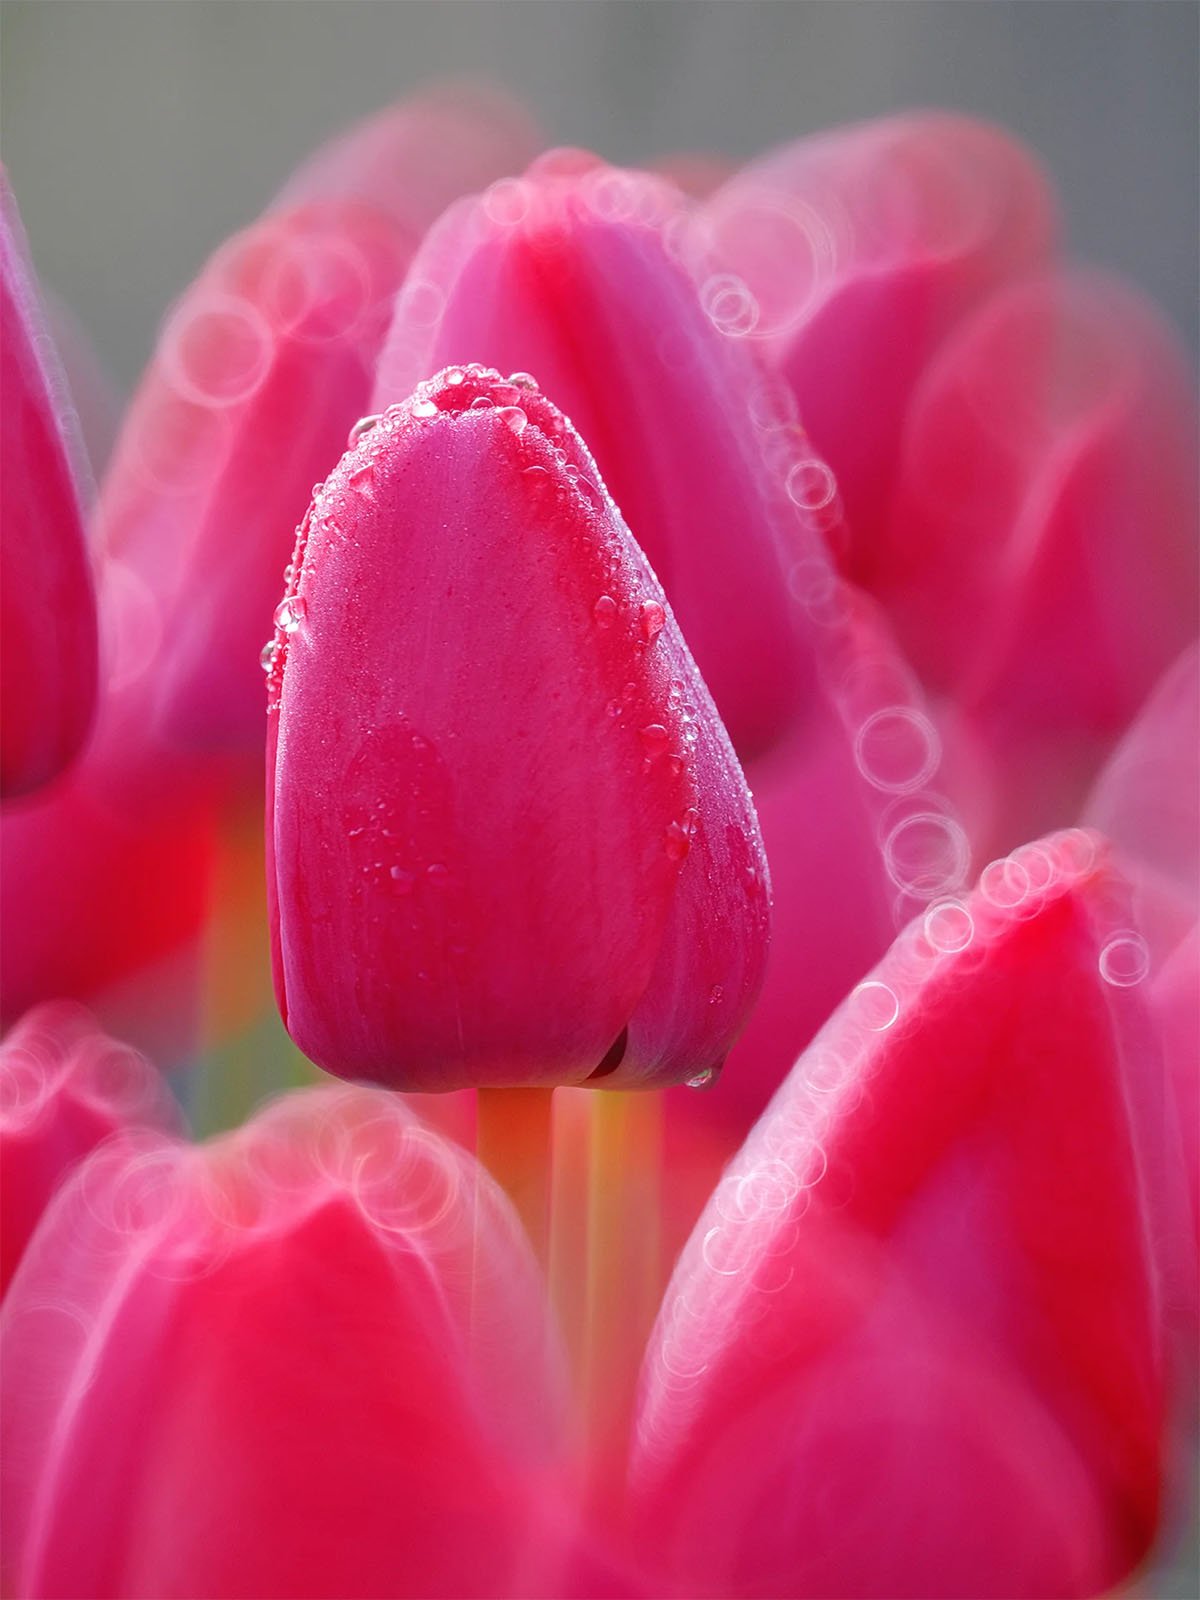 Close-up image of vibrant red tulips with one prominently in focus at the center, adorned with dewdrops. The background features additional tulips in soft focus, creating a dreamy, bokeh effect.